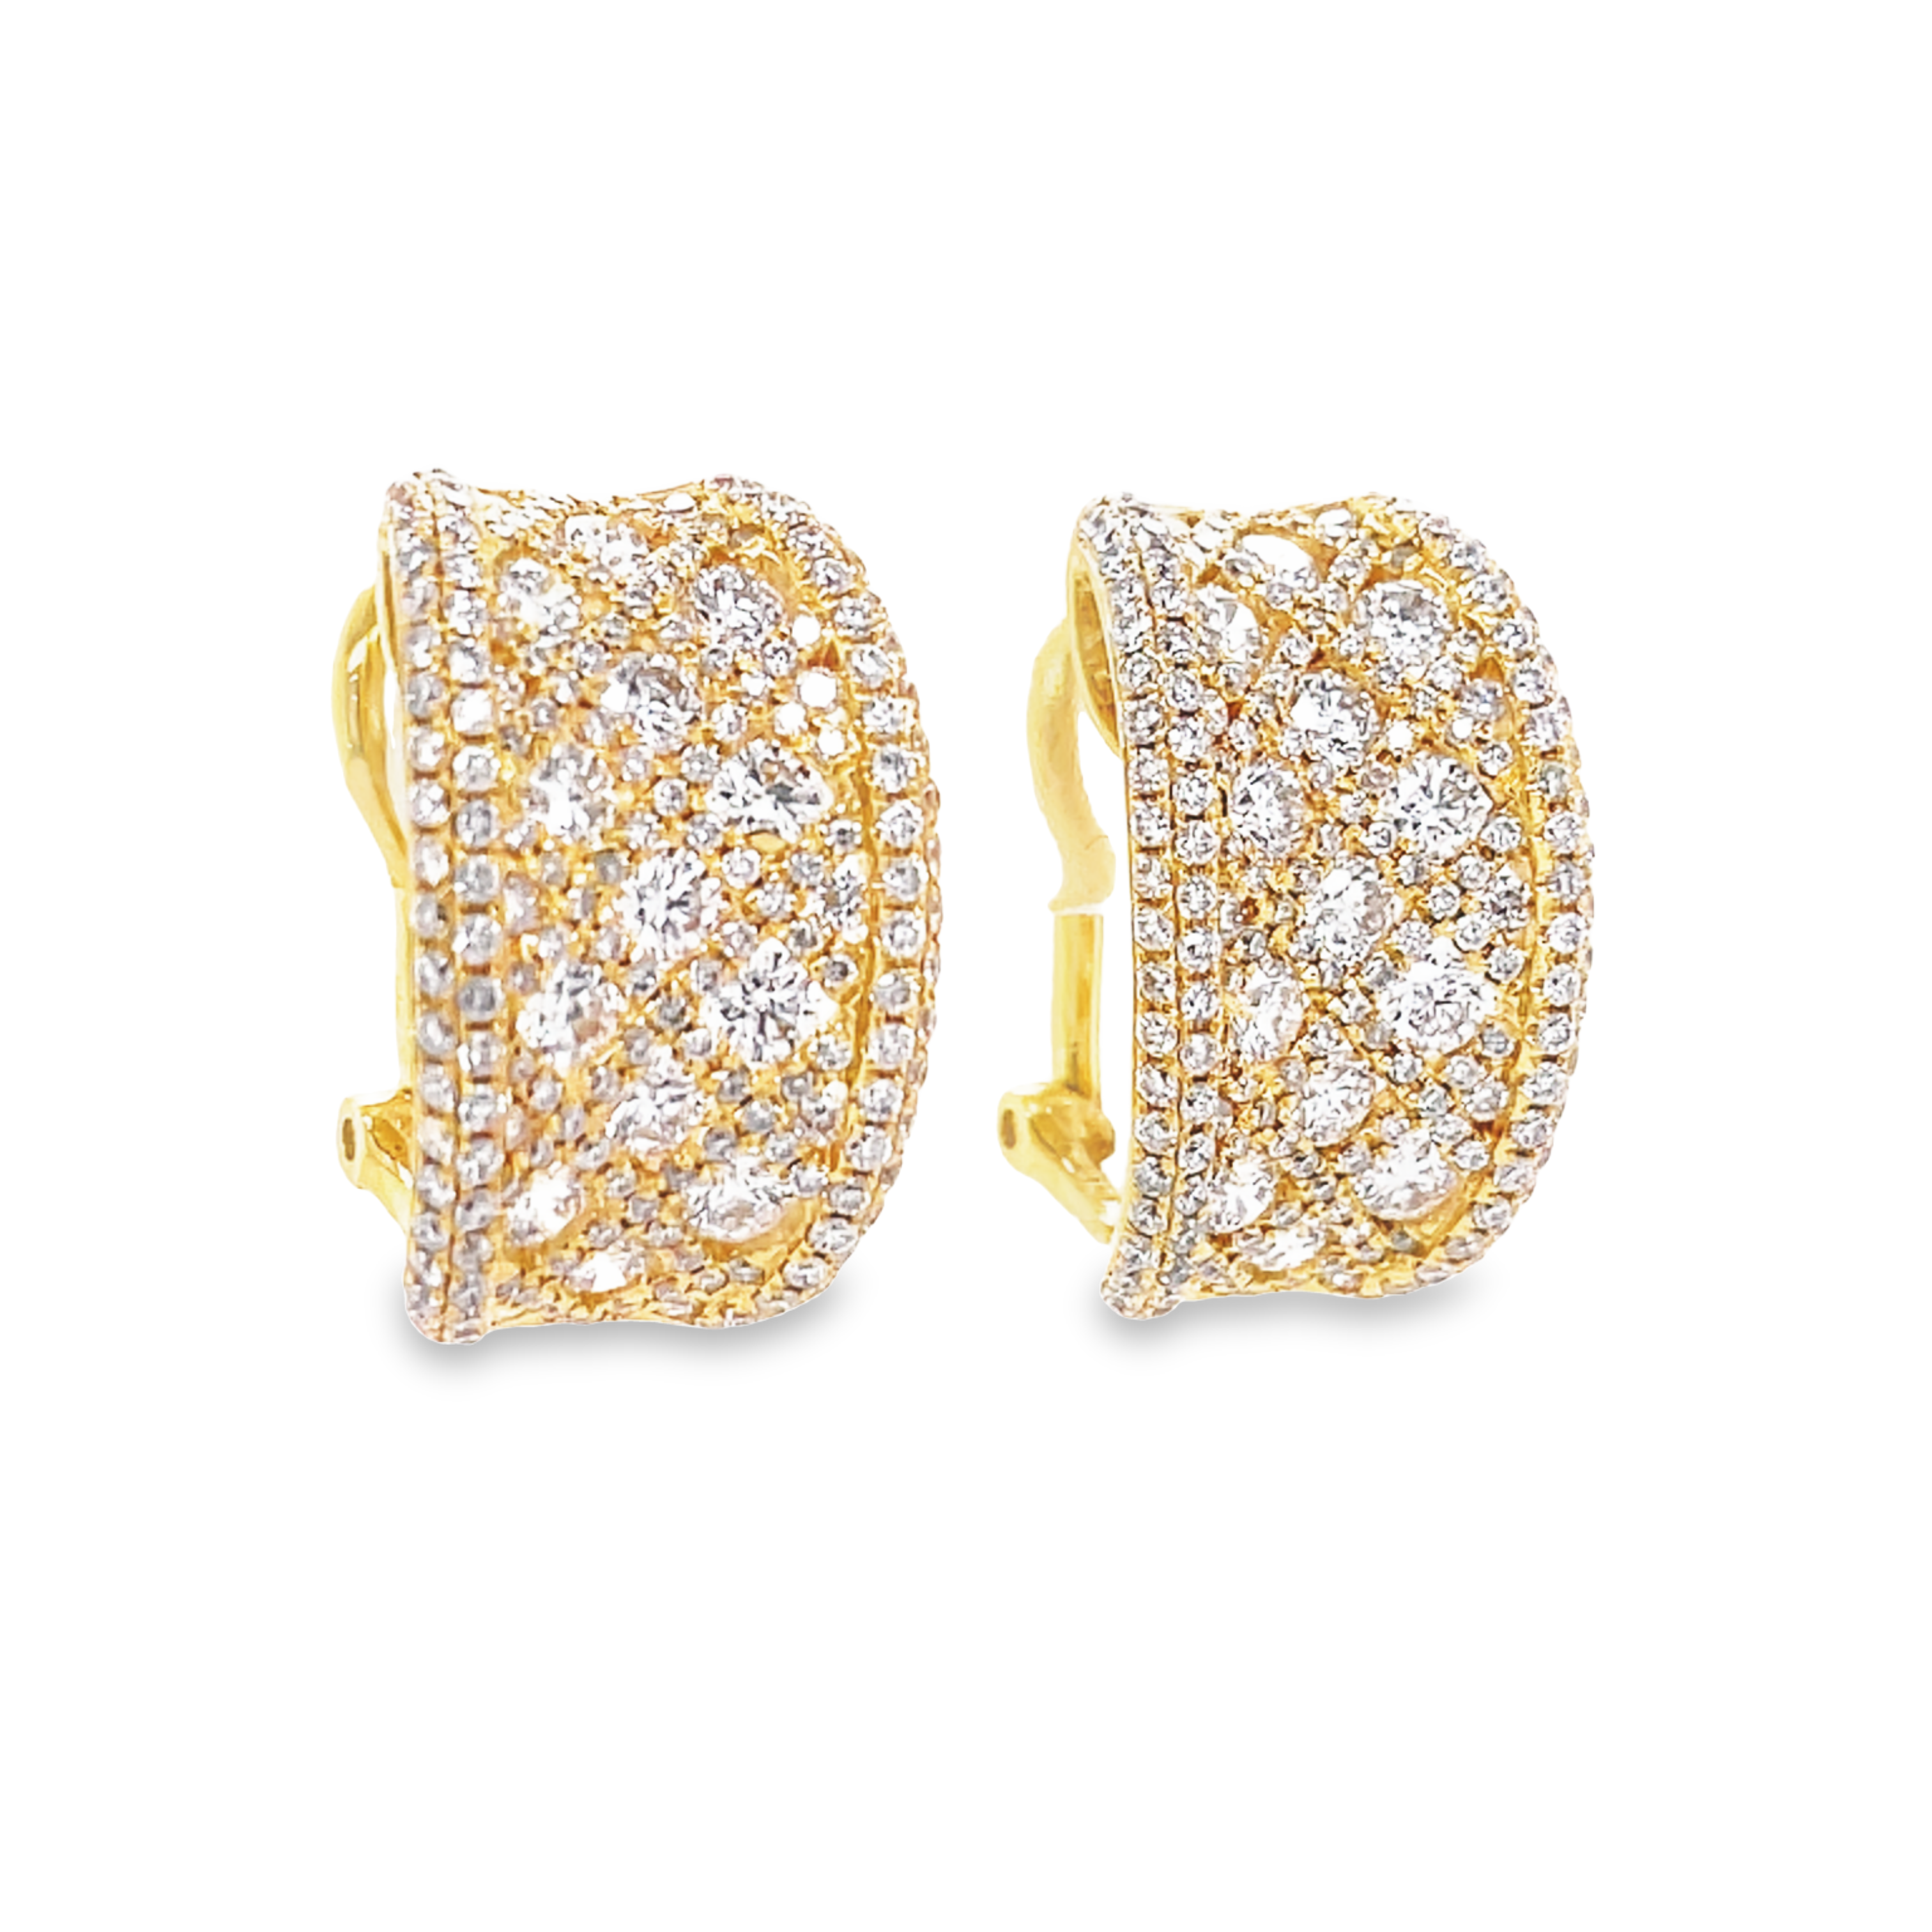 High quality diamonds 3.73 cts   18 yellow gold  Secure omega system  12.00 x 19.00 mm  Diamond pave set  Weave pattern